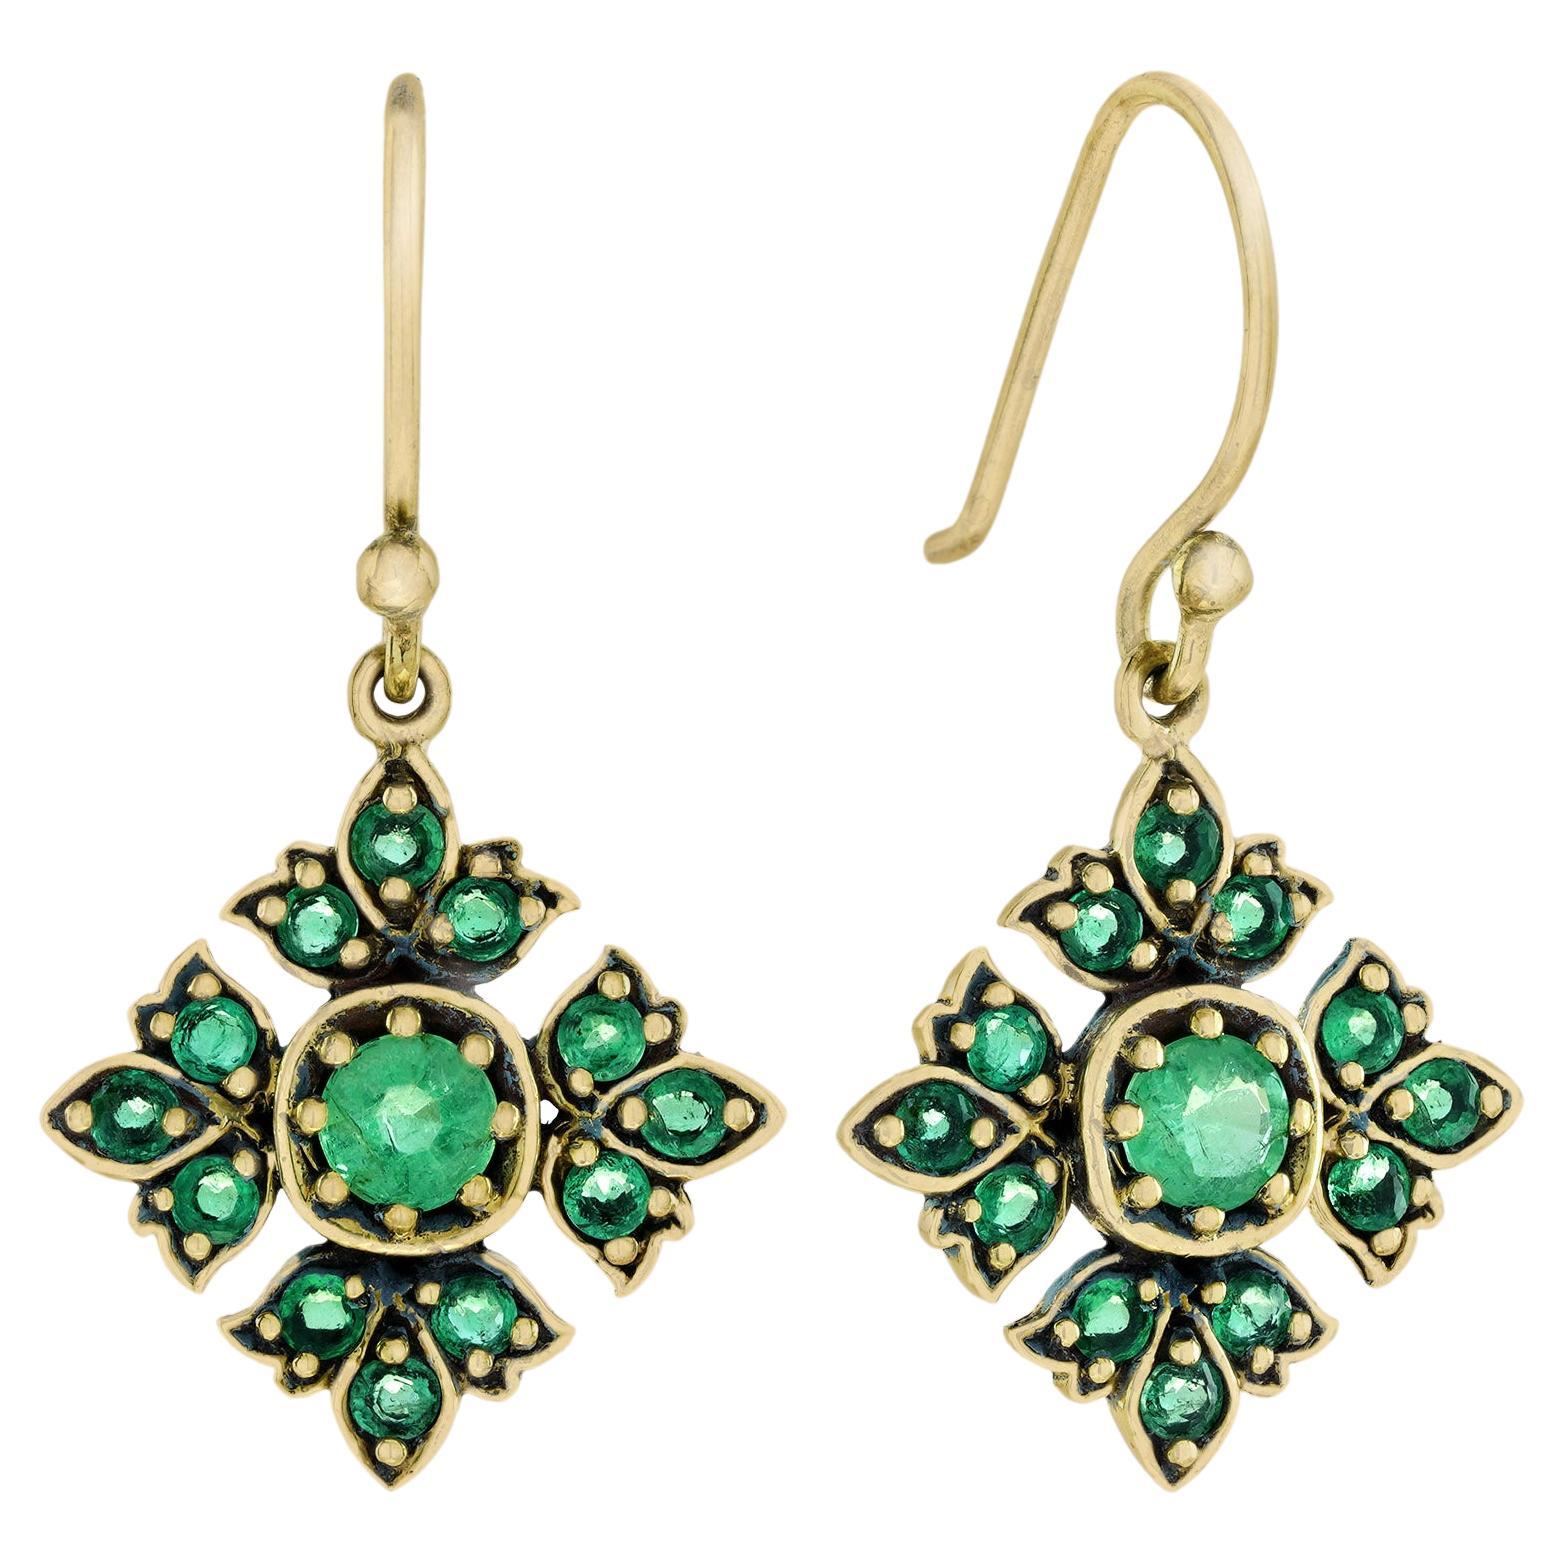 Natural Emerald Vintage Style Floral Drop Earrings in Solid 9K Yellow Gold